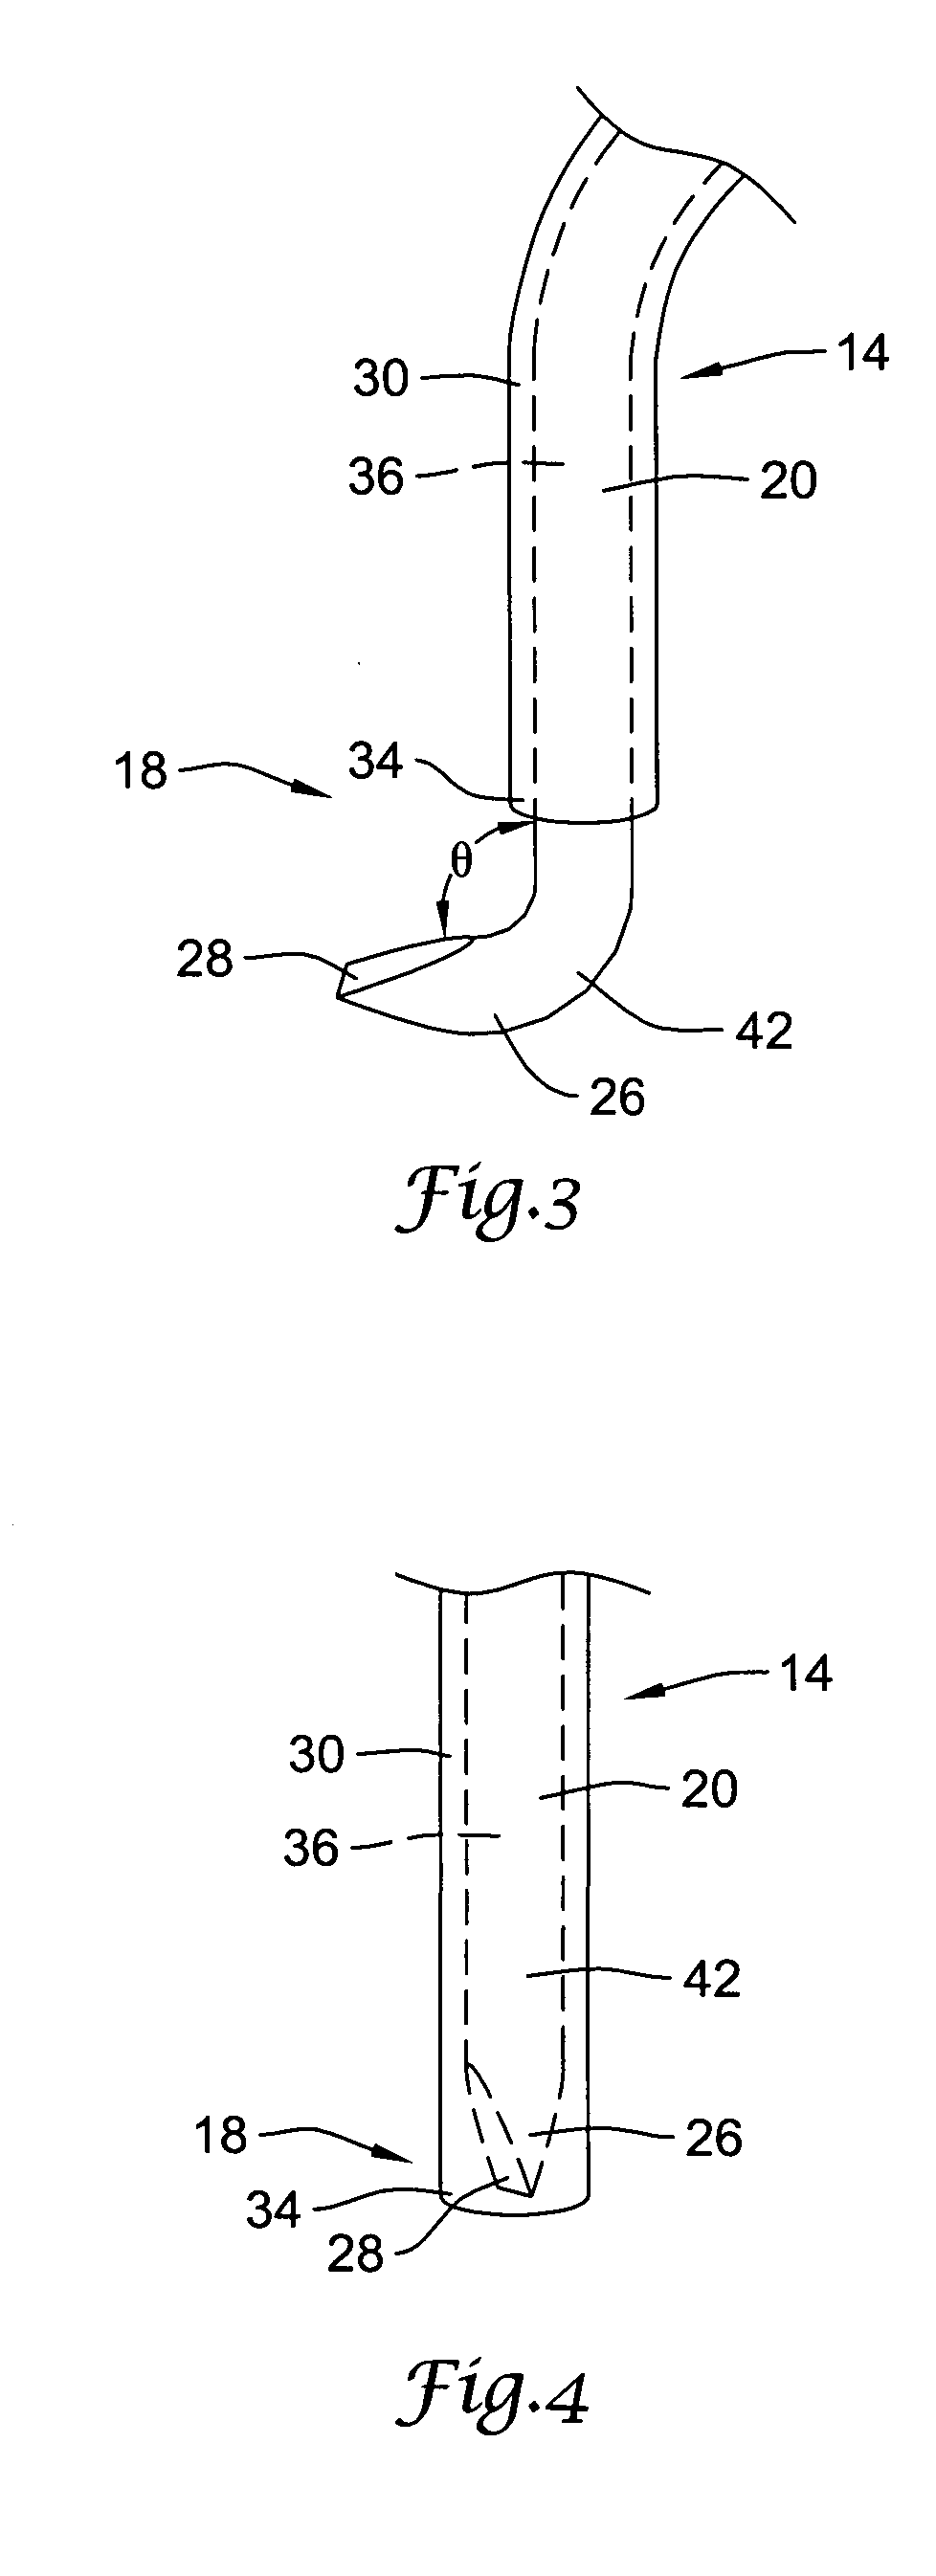 Retrievable blood clot filter with retractable anchoring members